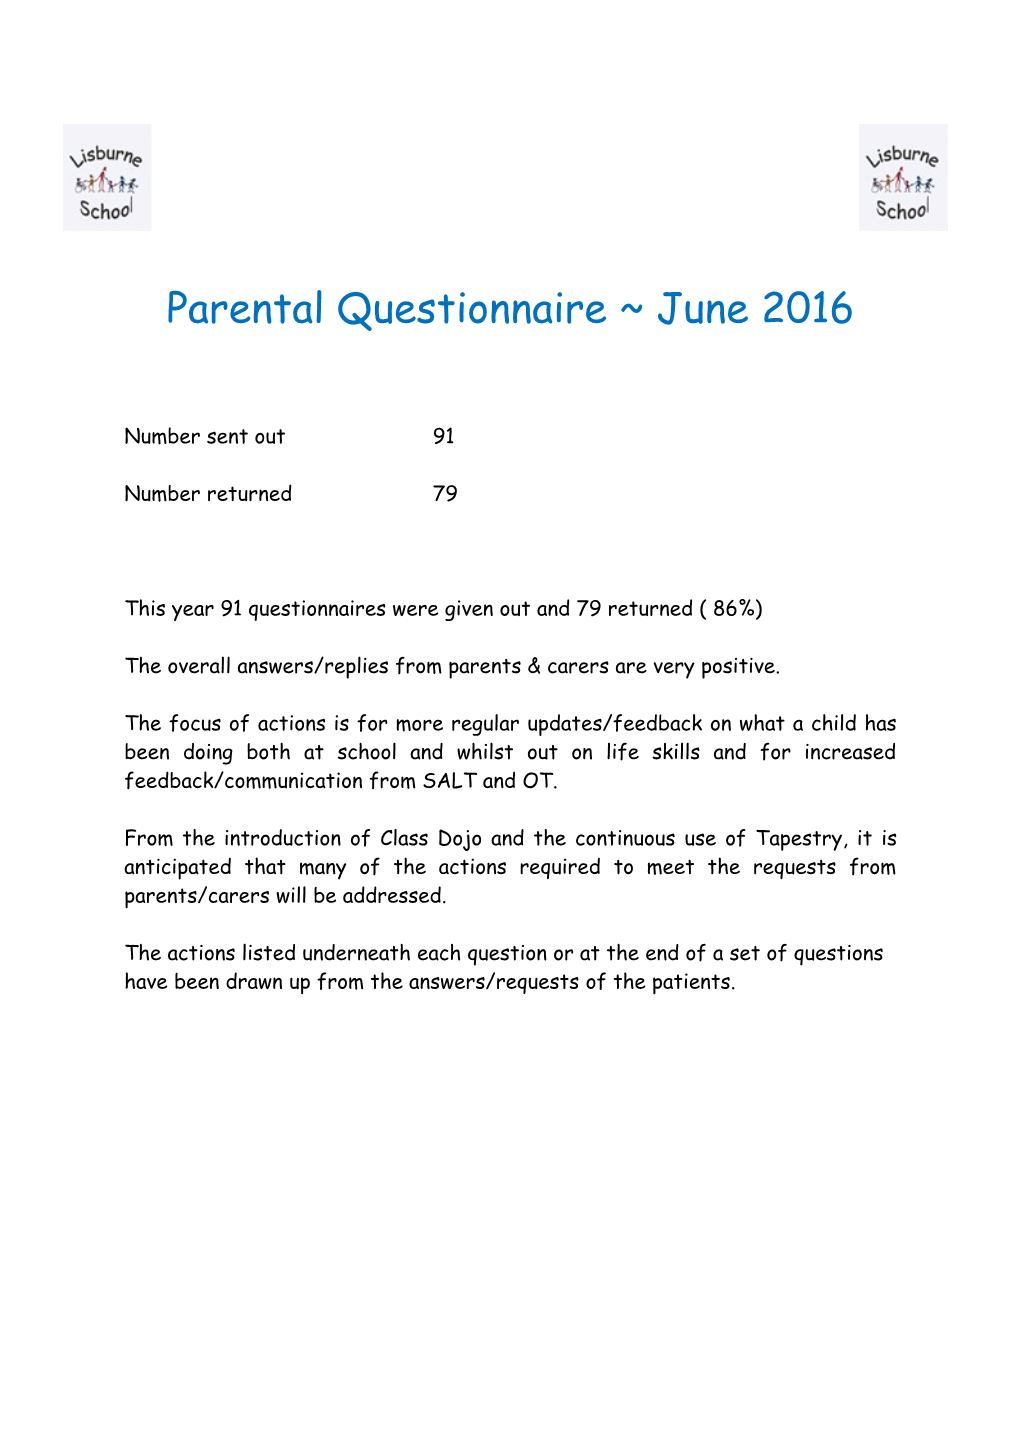 This Year 91 Questionnaires Were Given out and 79 Returned ( 86%)